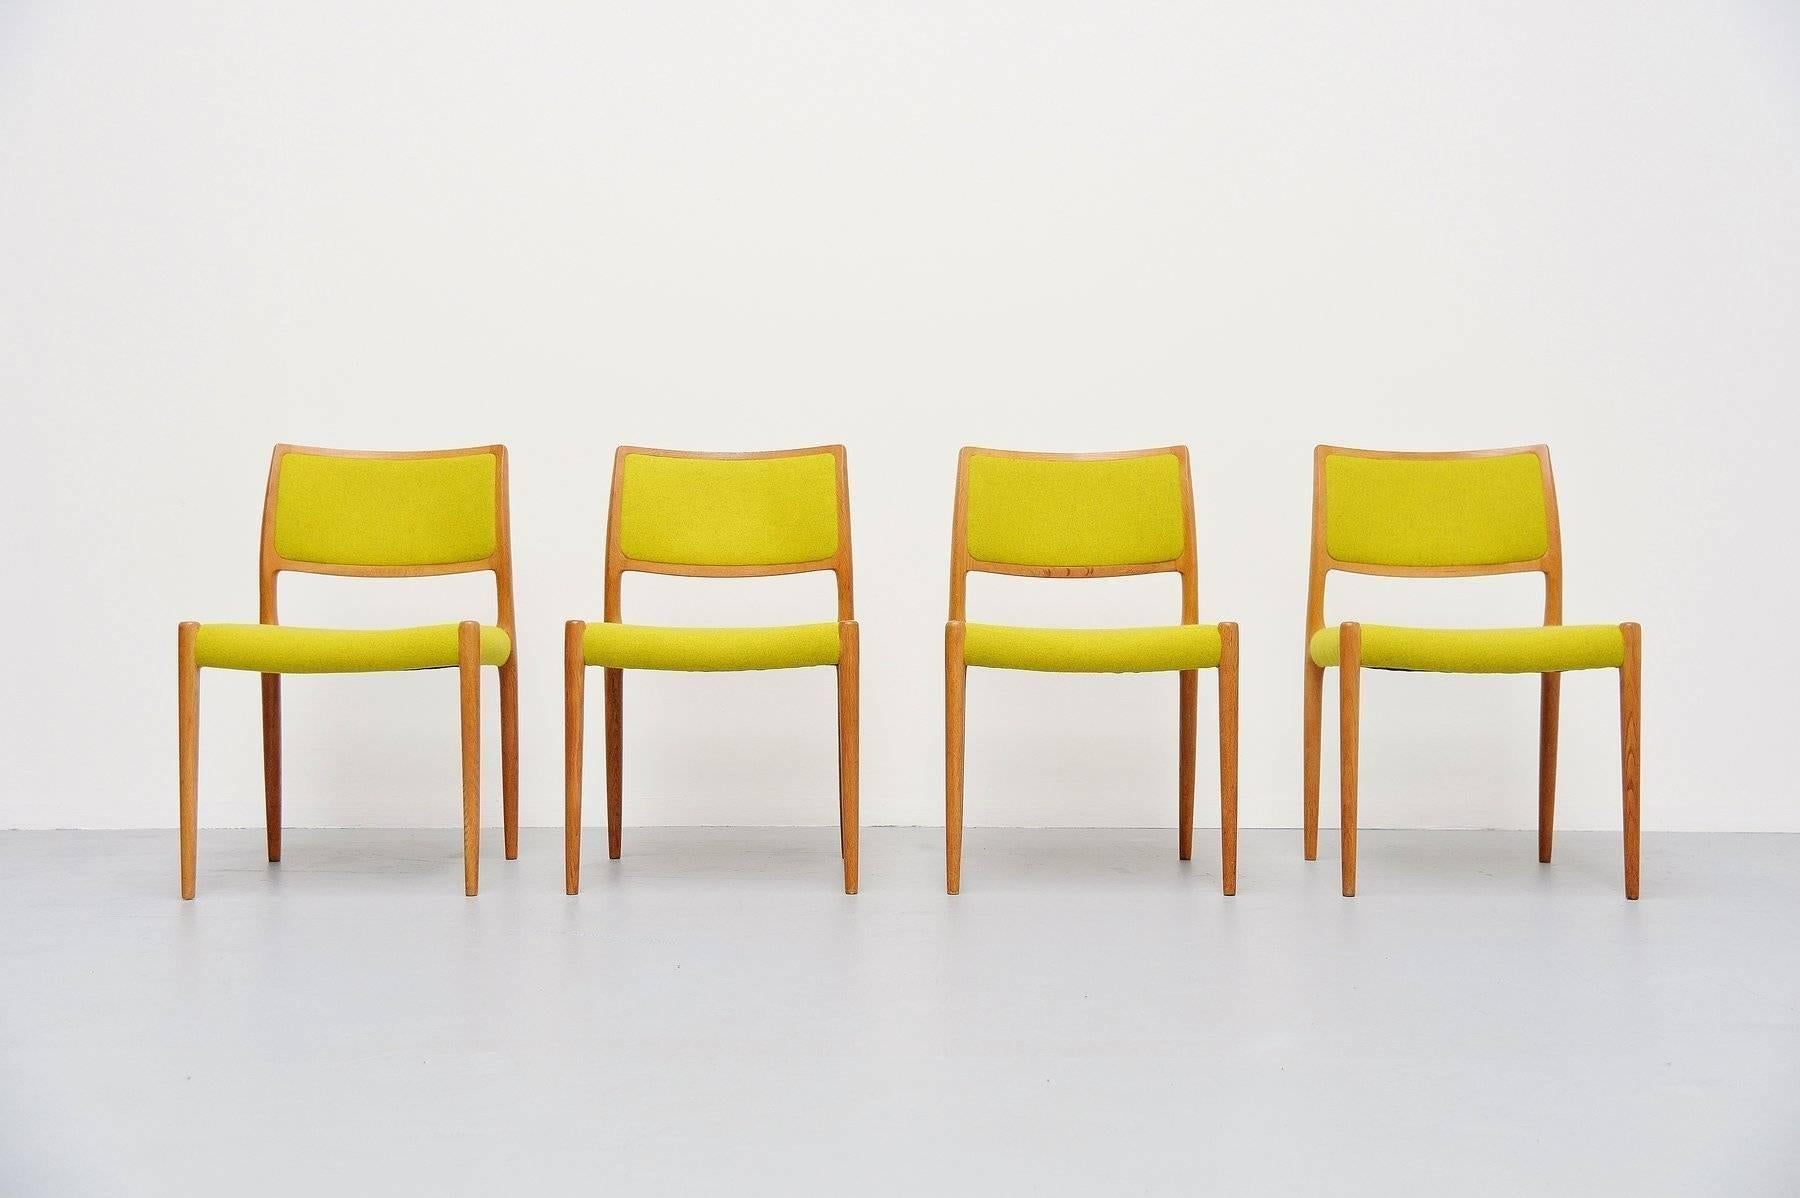 Set of four dining chairs model 80 designed by Niels Moller for J.L Møllers Møbelfabrik, Denmark 1968. These chairs are made of solid oak which is in excellent original condition and they are newly upholstered in lime green Divina fabric by